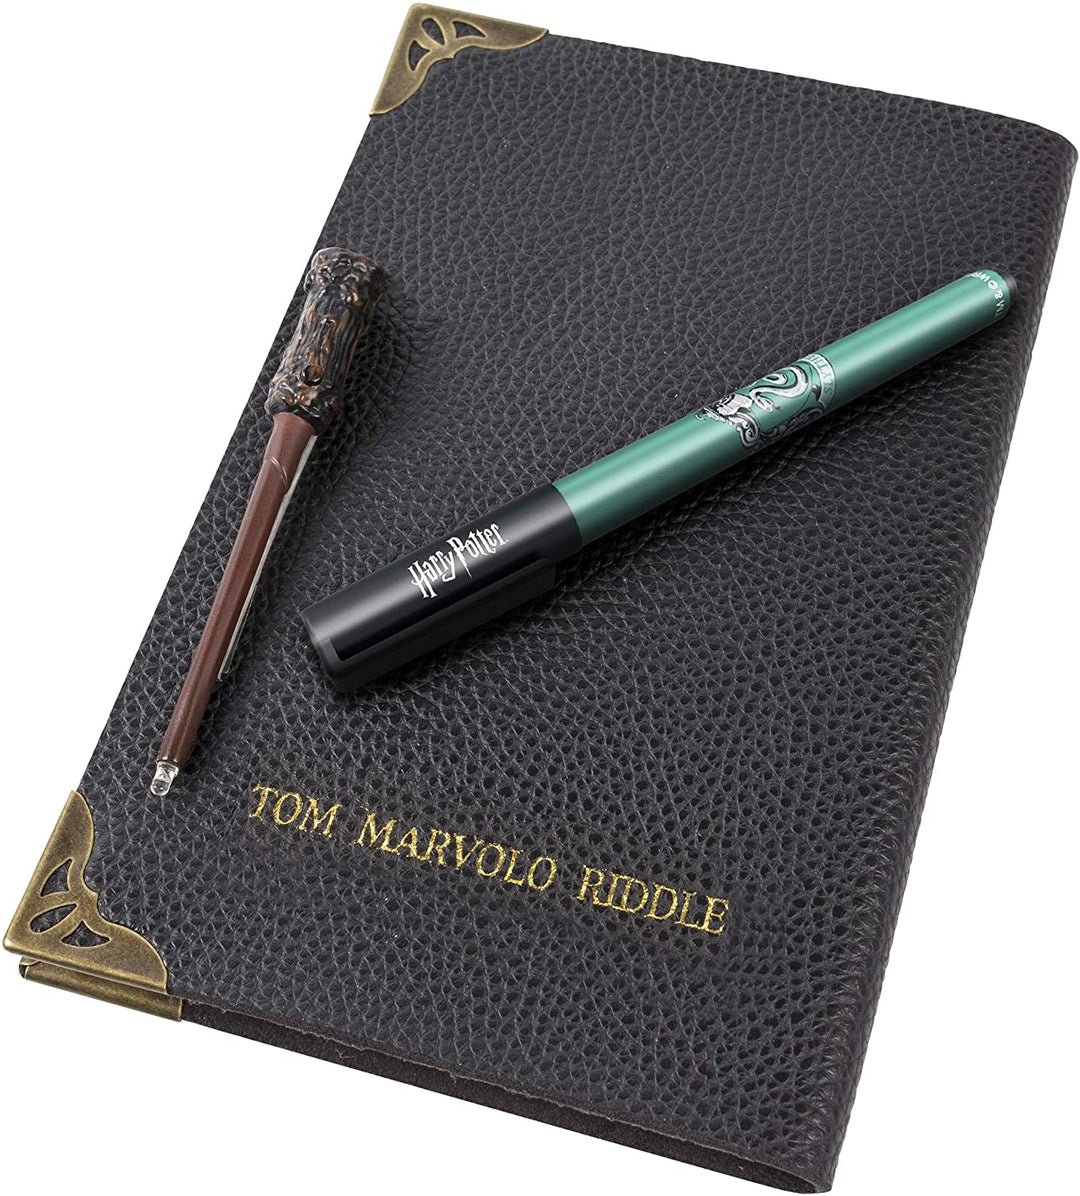 Wow! Stuff Collection Harry Potter Tom Riddle's Diary Notebook, Slytherin House Pen, & UV Wand